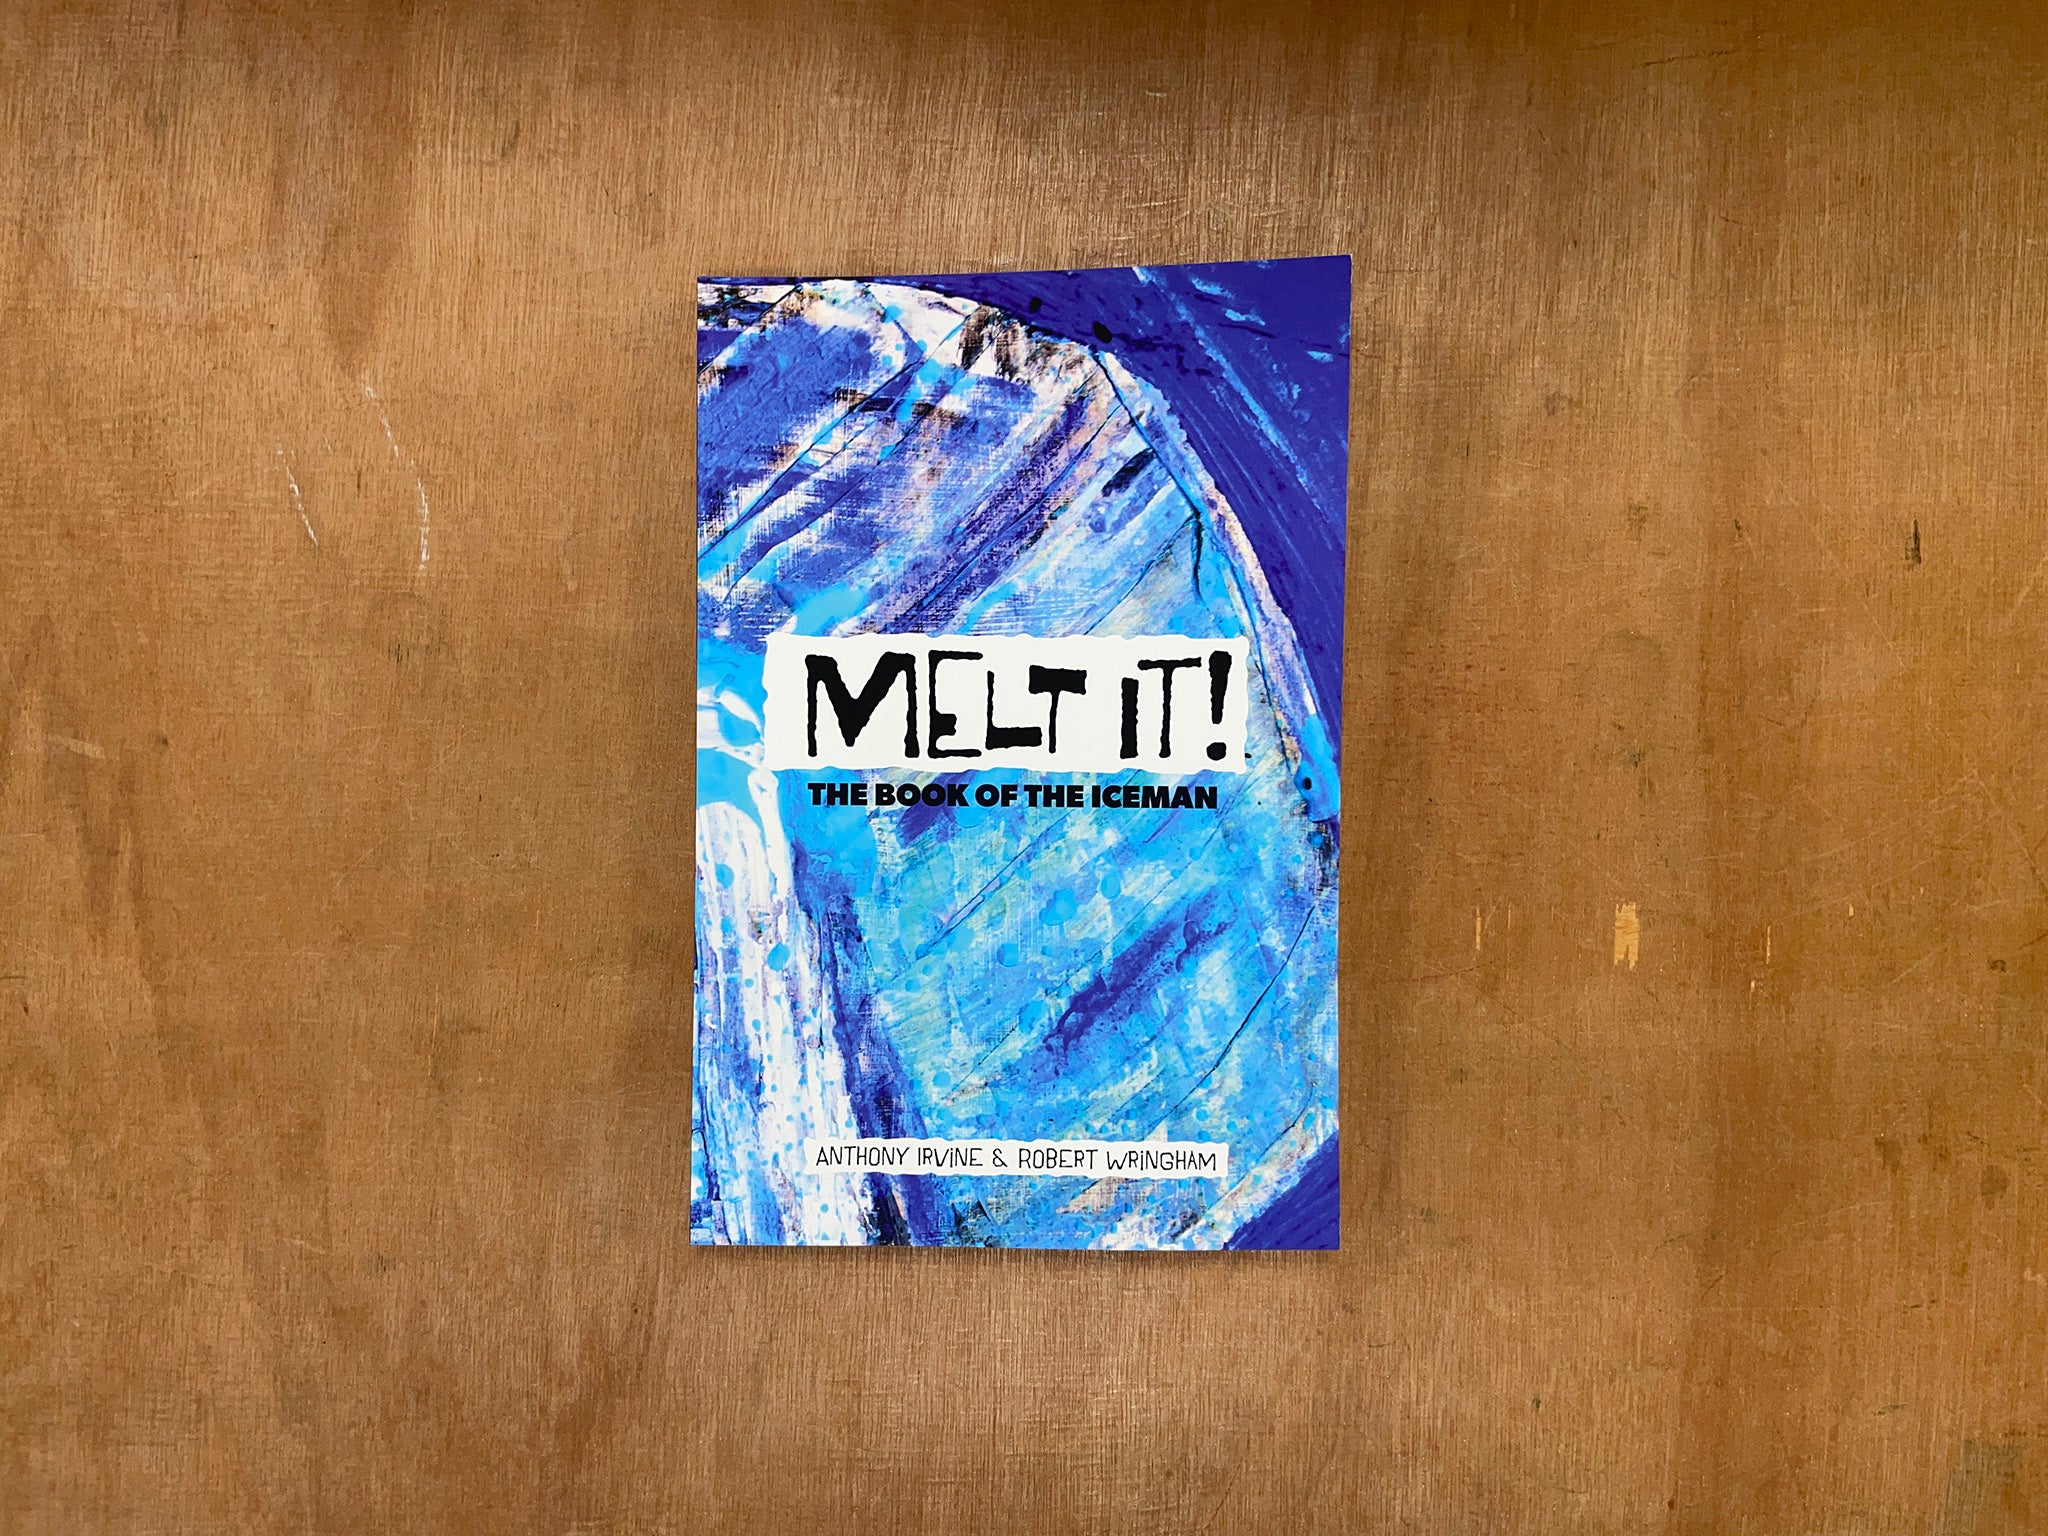 MELT IT! THE BOOK OF THE ICEMAN by Anthony Irvine & Robert Wringham